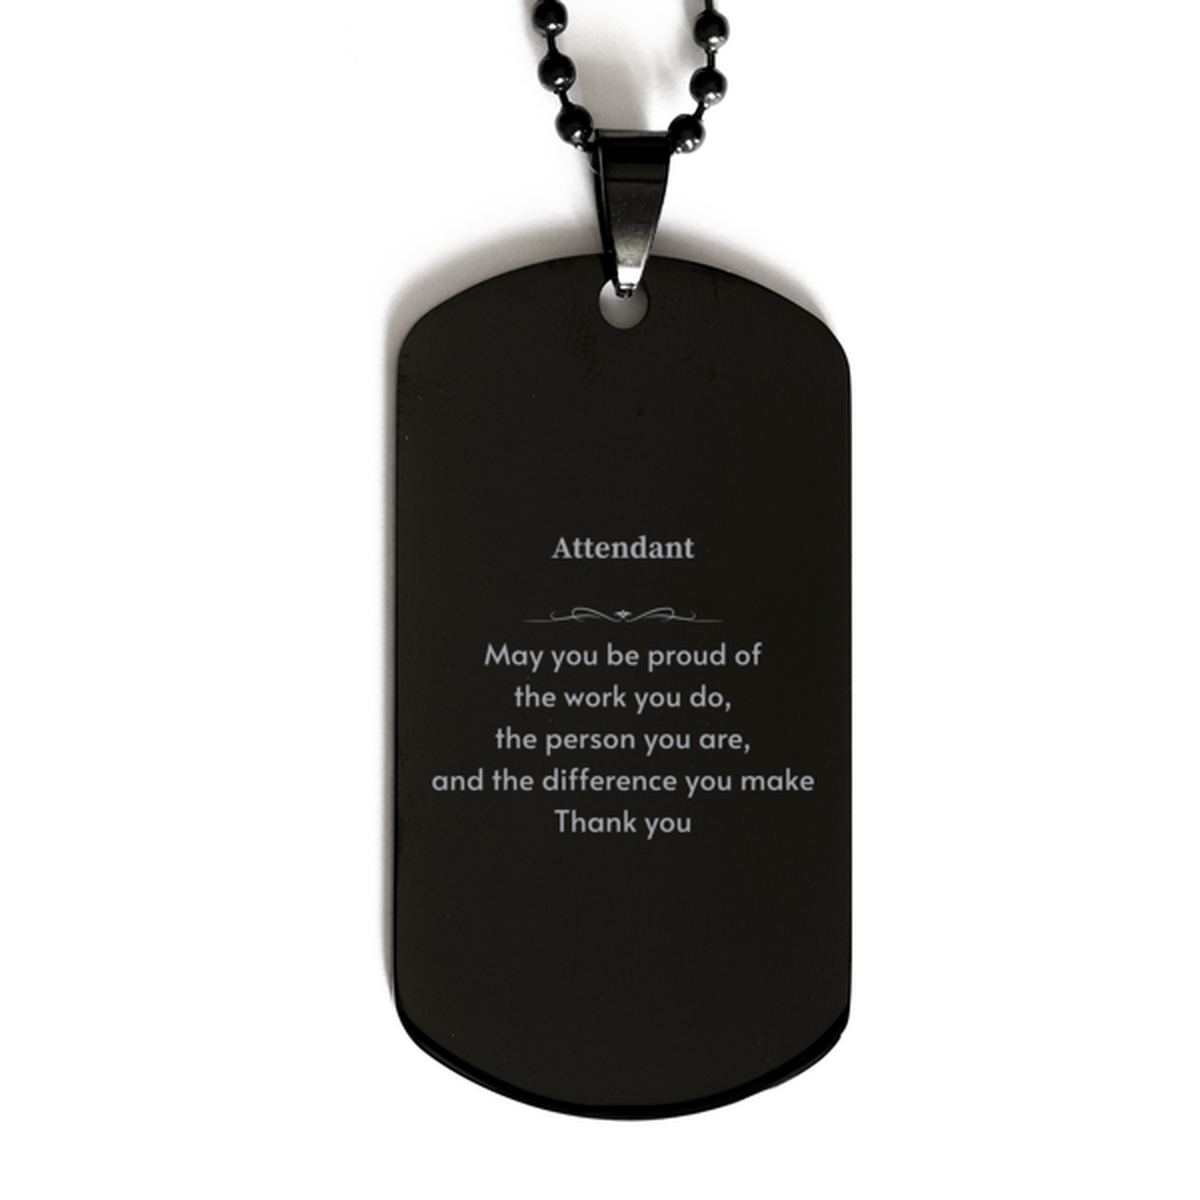 Heartwarming Black Dog Tag Retirement Coworkers Gifts for Attendant, Attendant May You be proud of the work you do, the person you are Gifts for Boss Men Women Friends